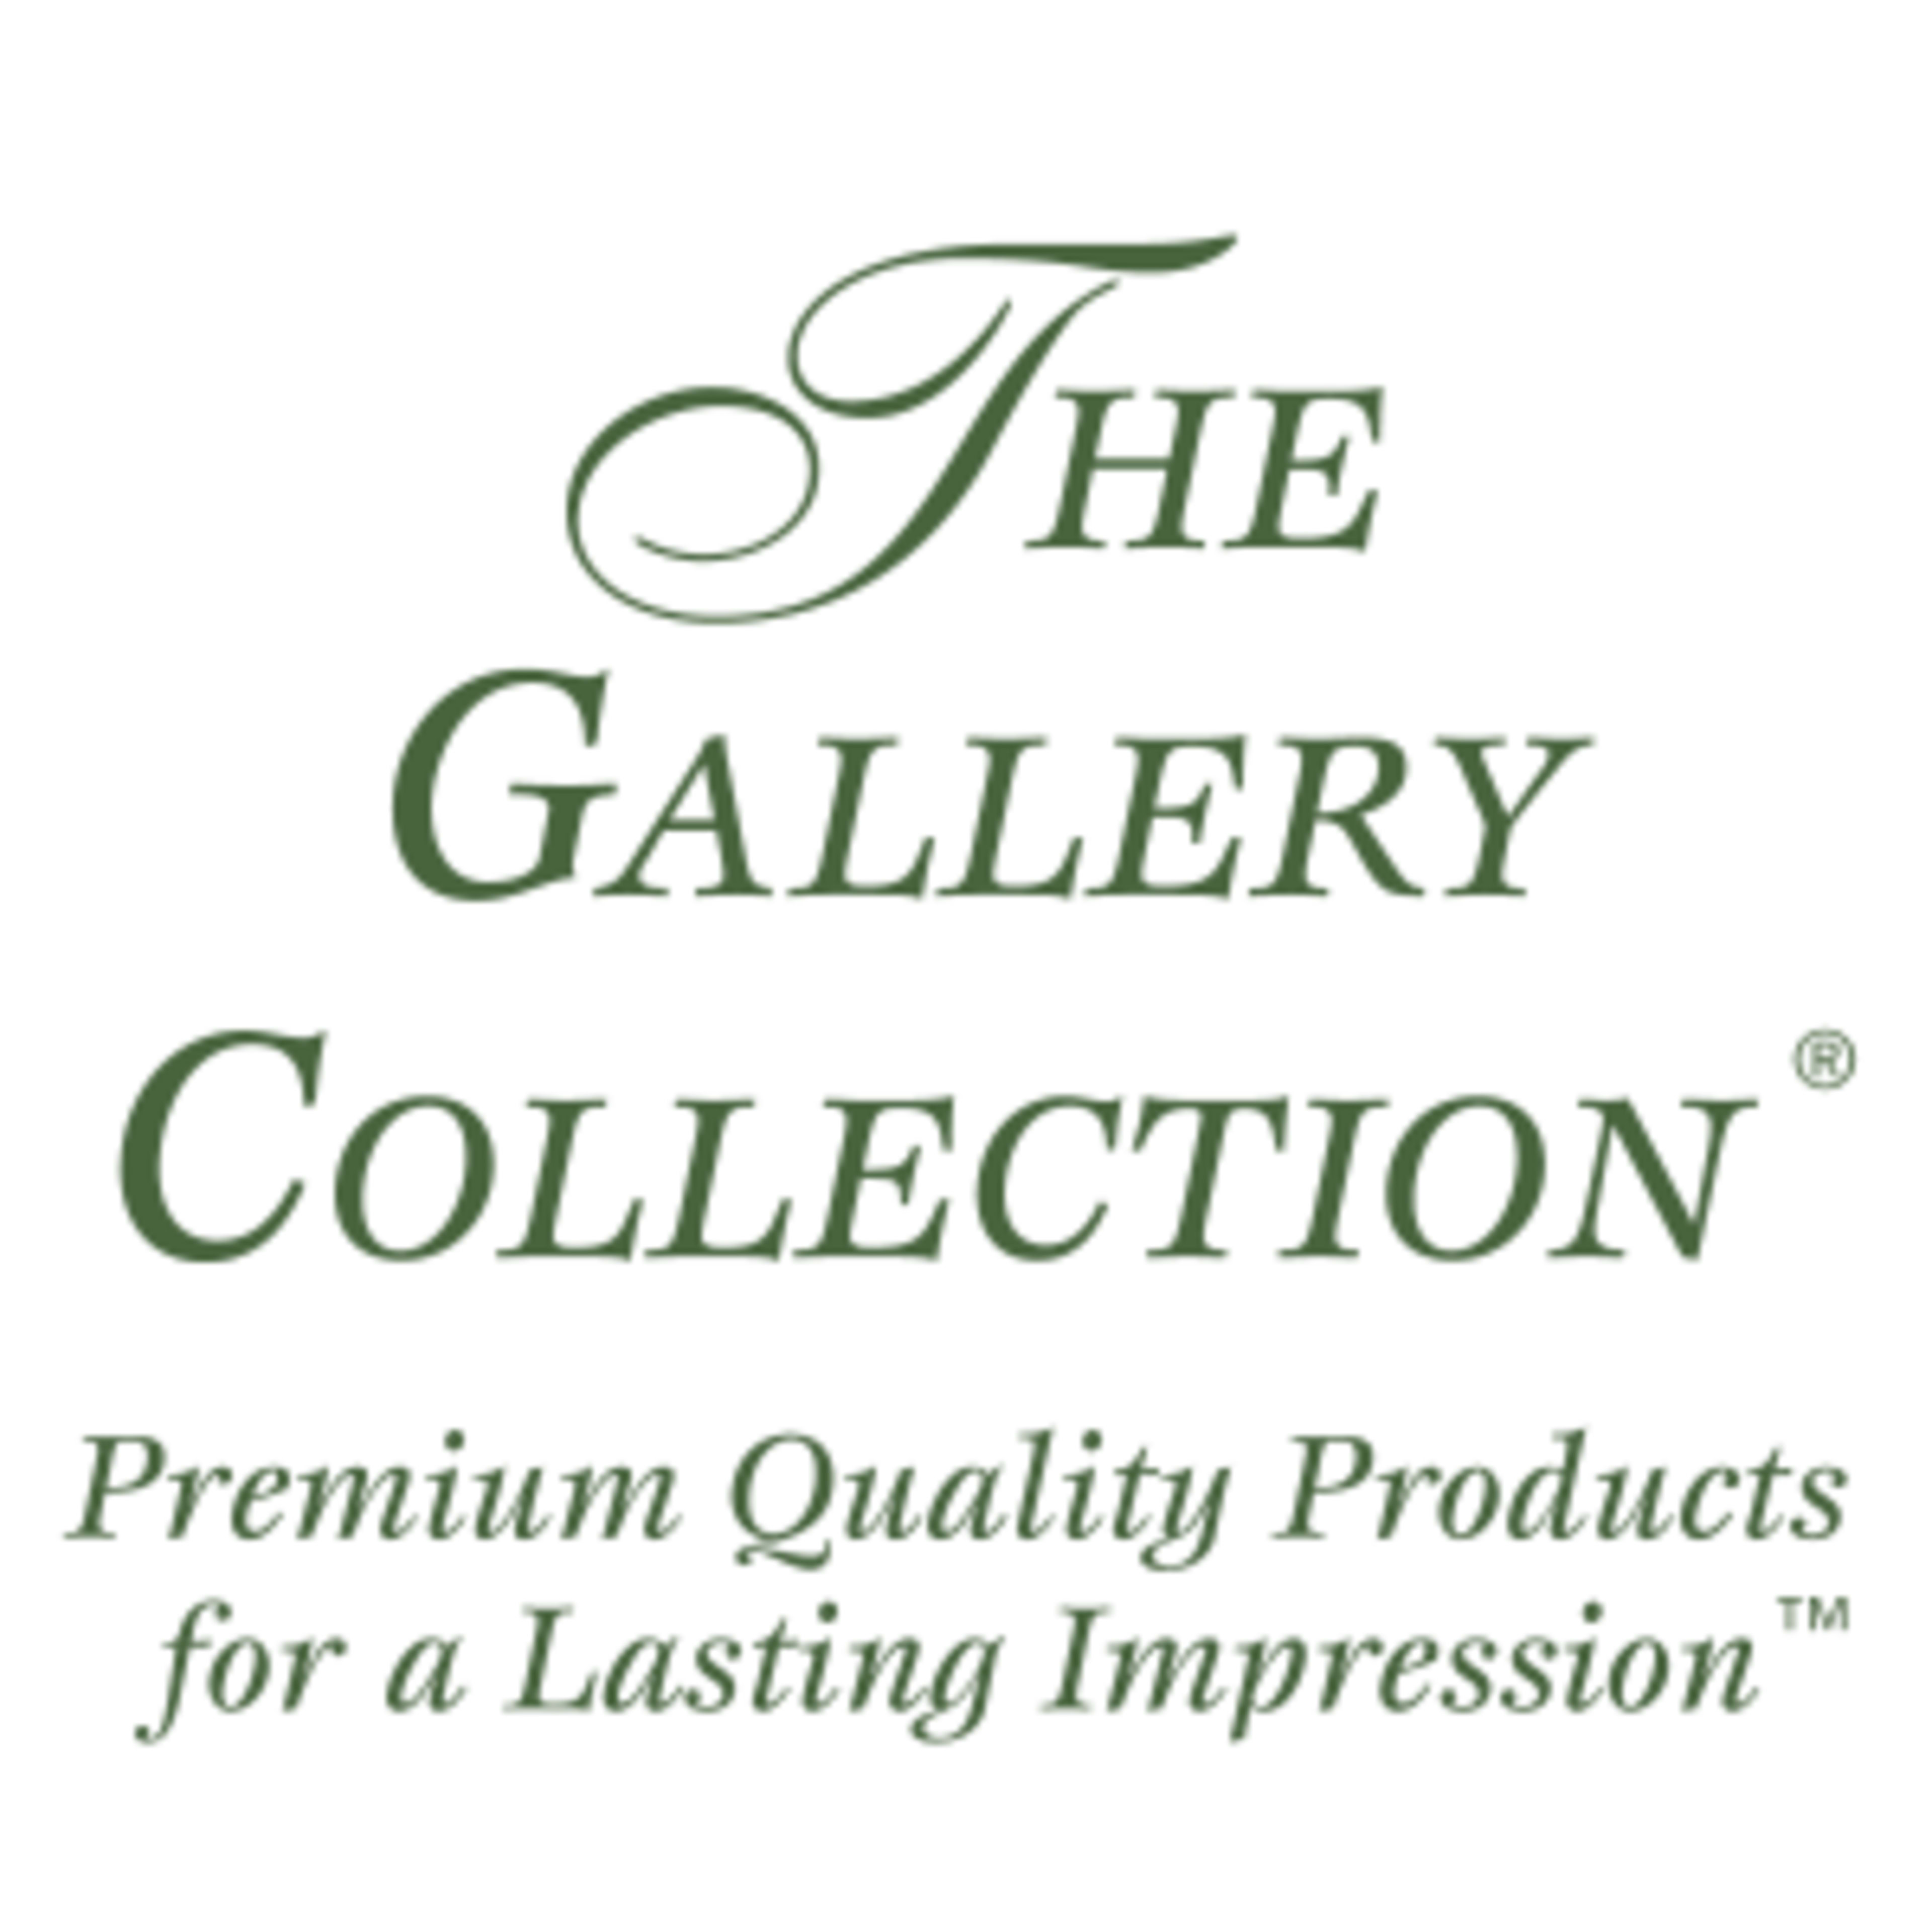 Gallery Collection Code